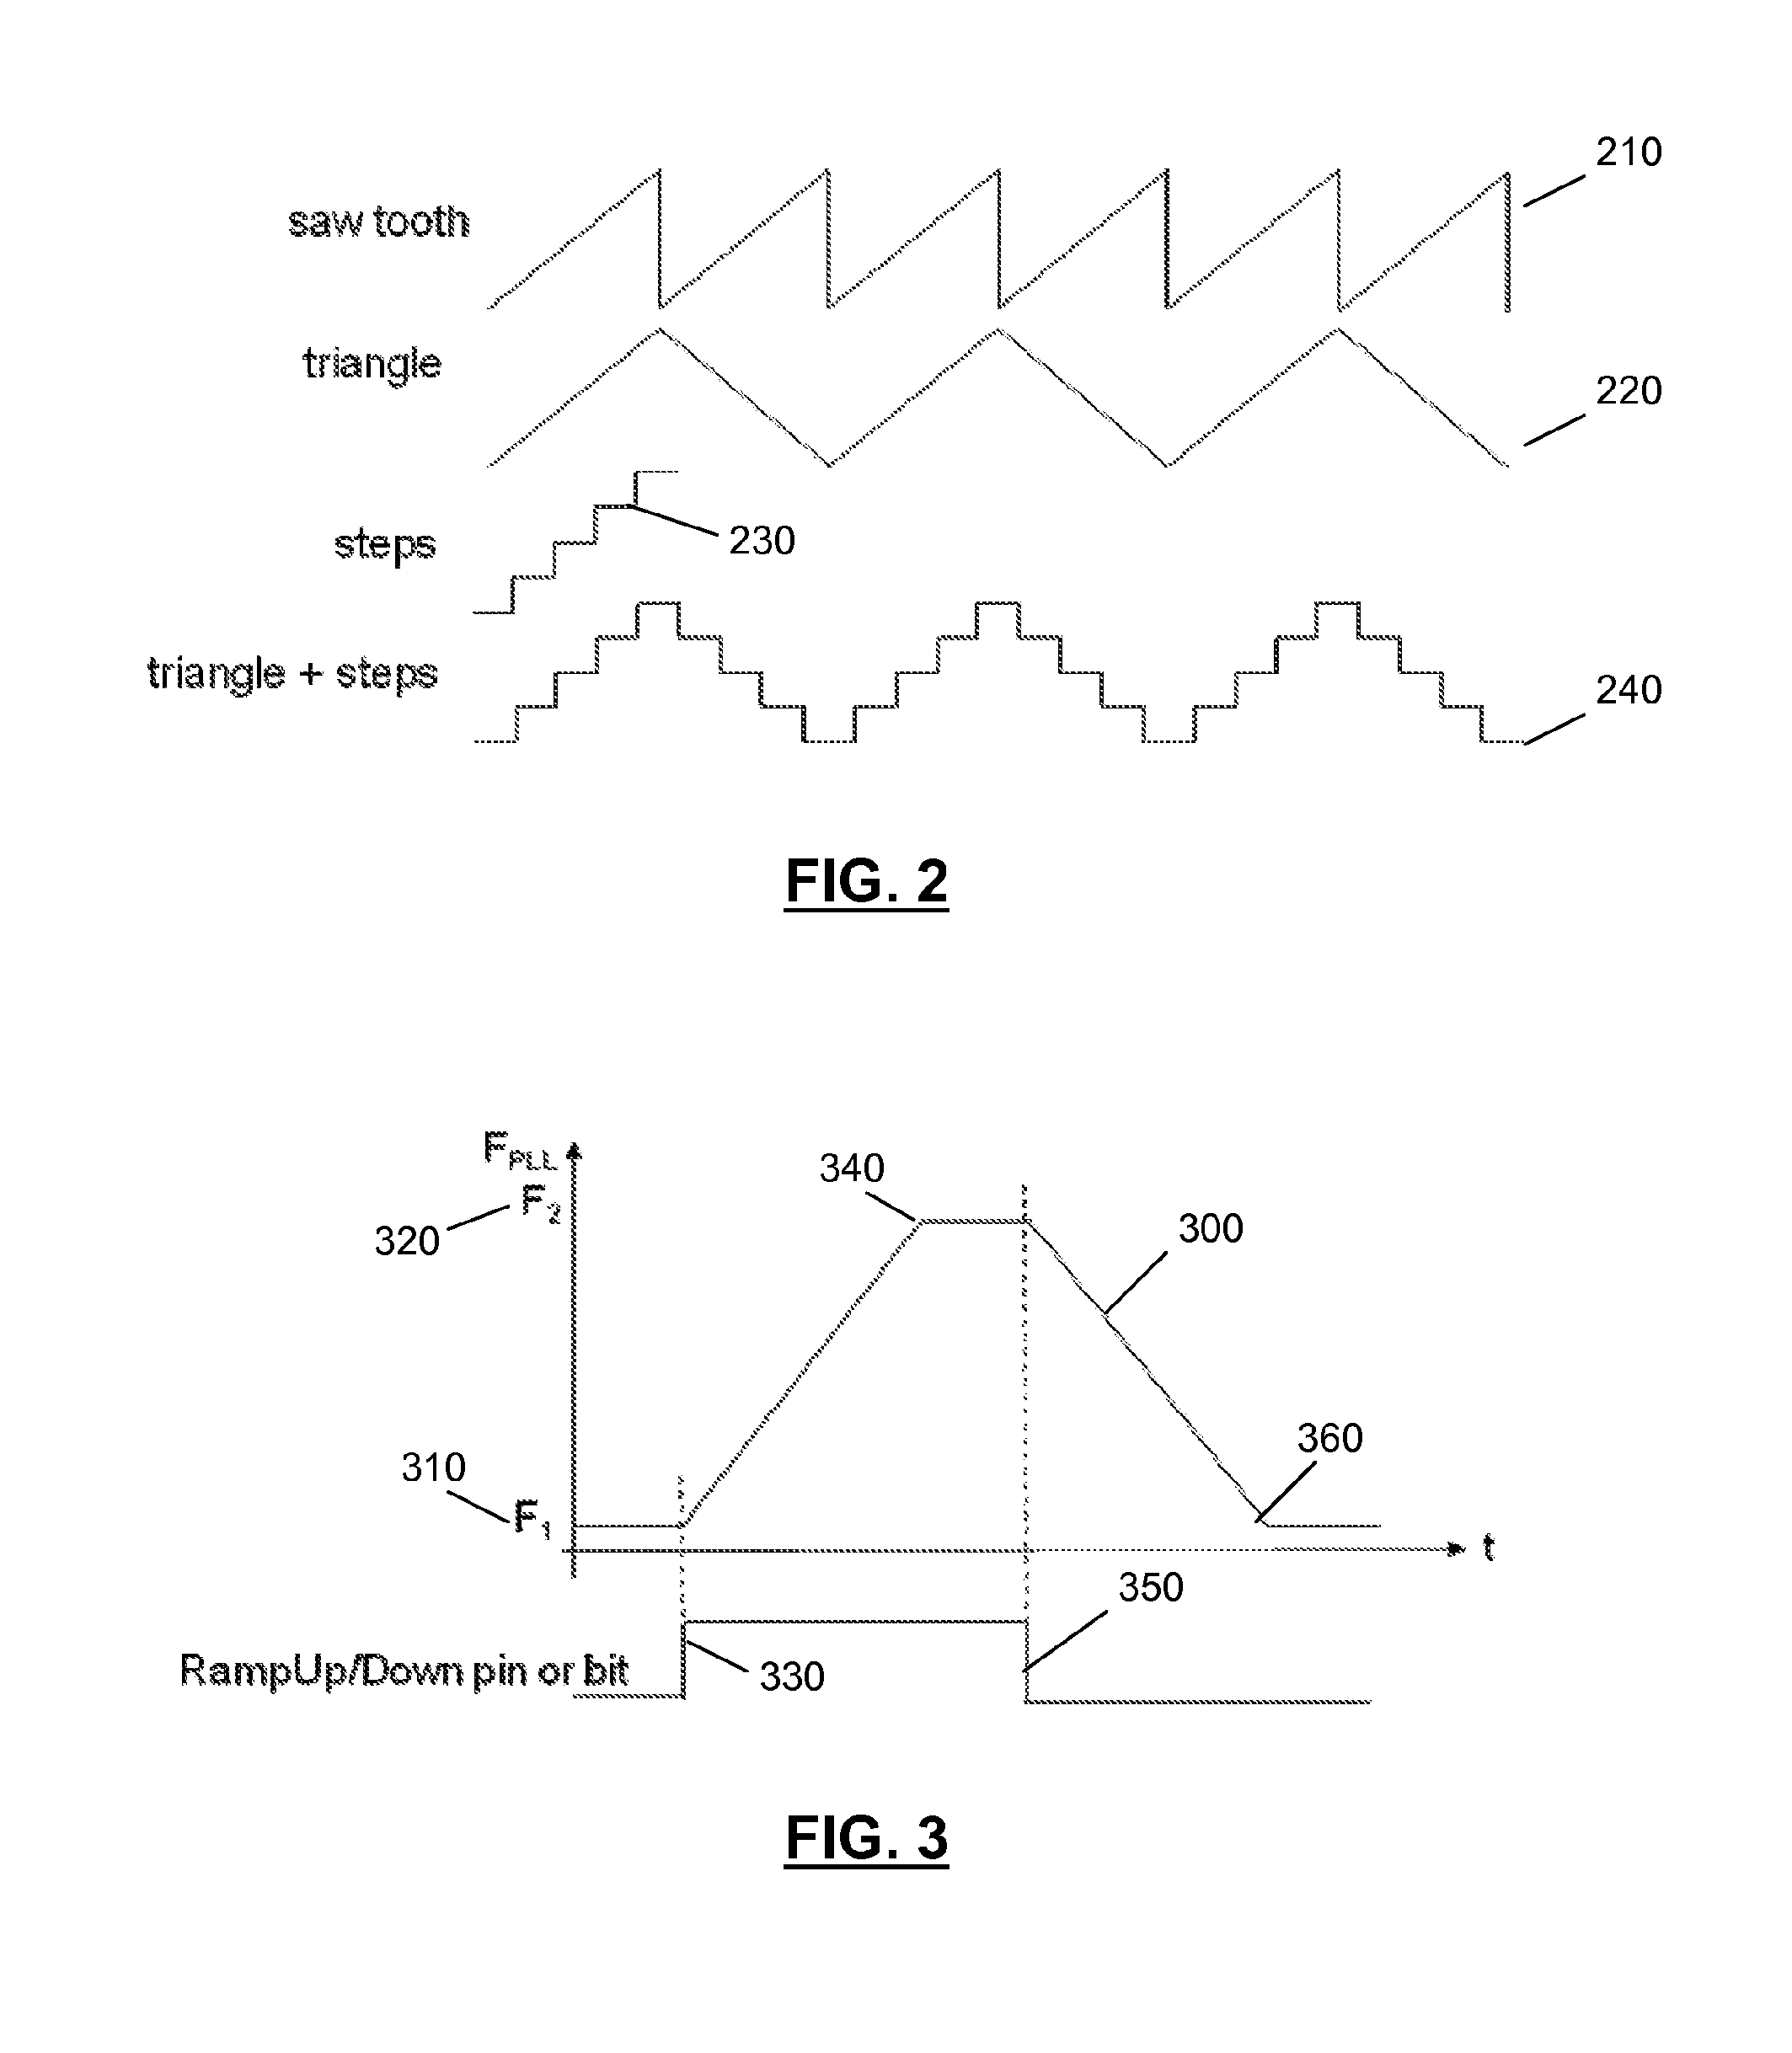 Integrated circuit comprising frequency generation circuitry for controlling a frequency source